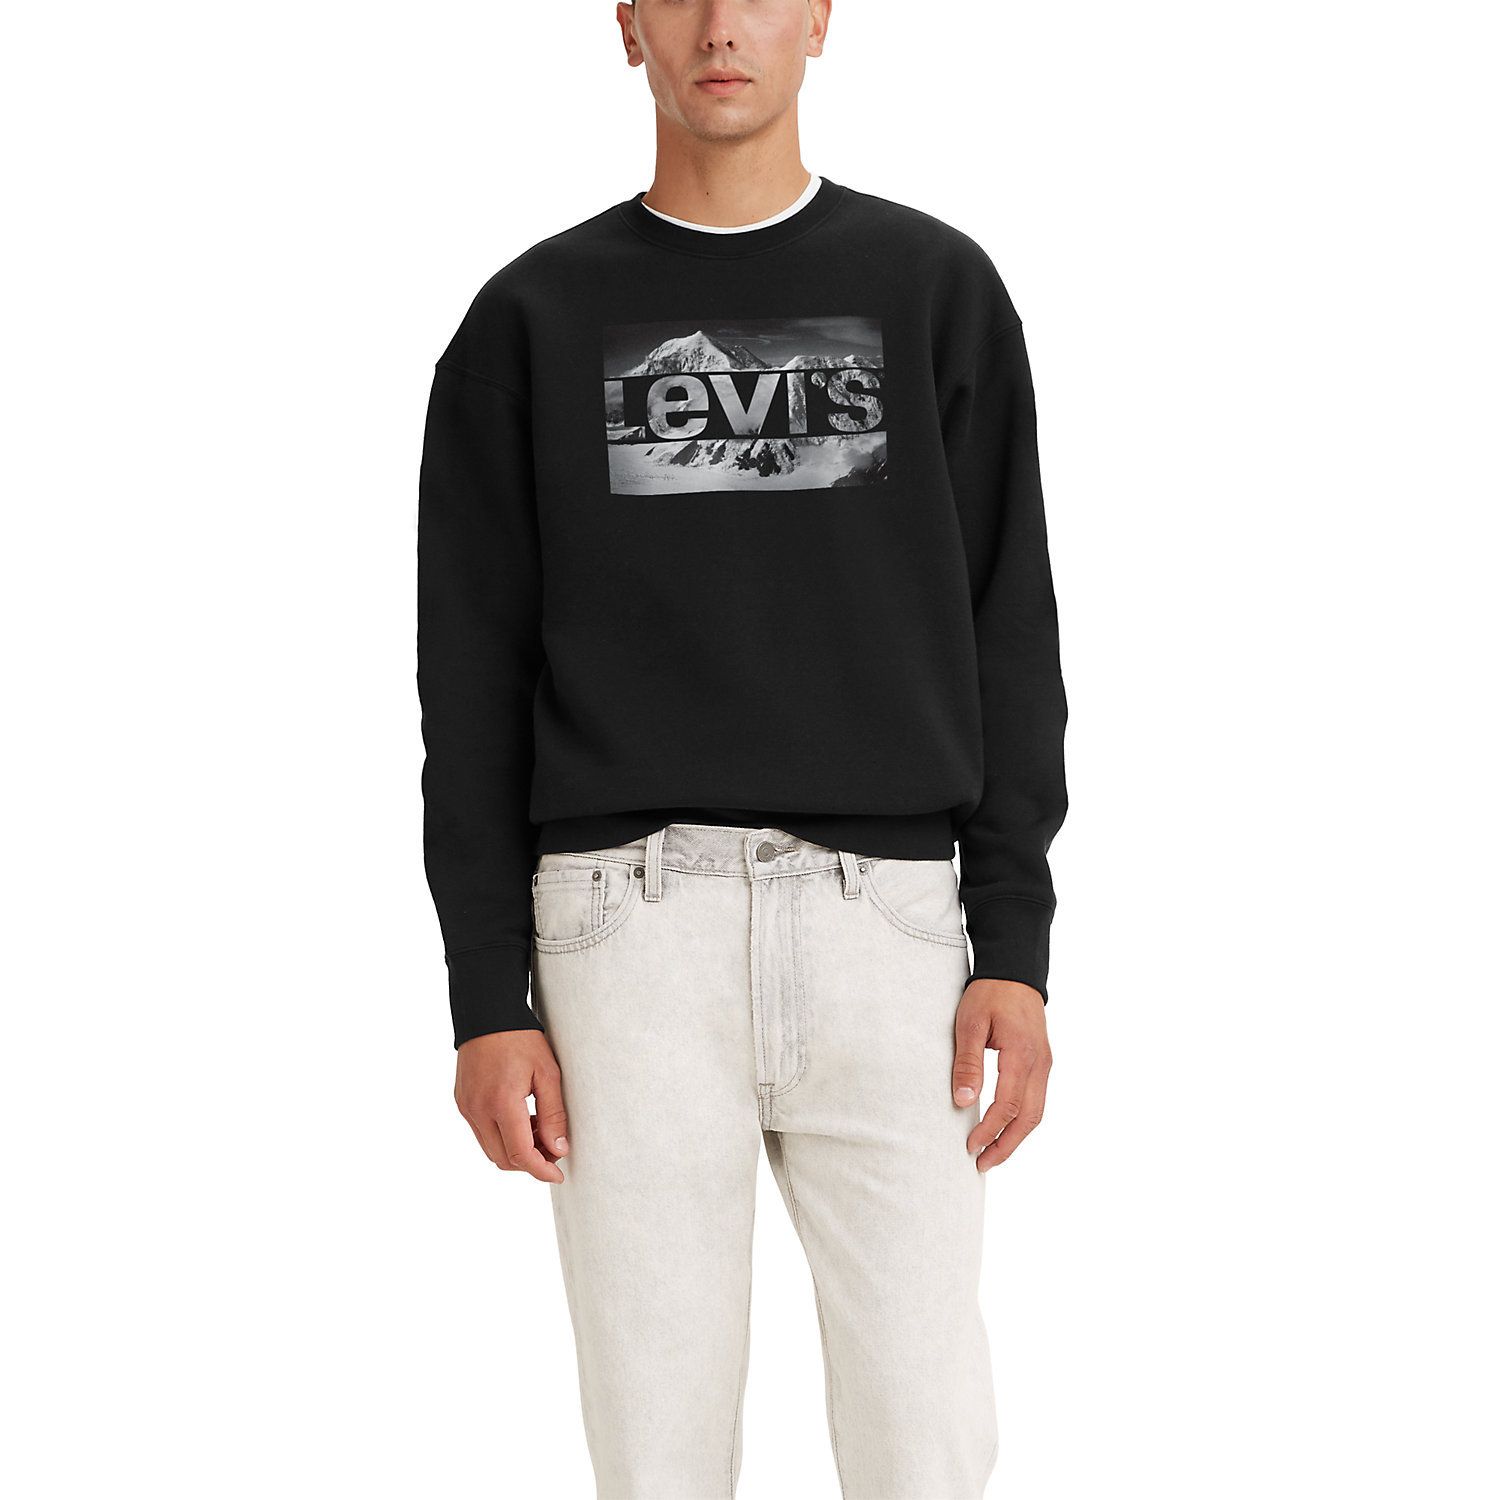 Image for Levi's Men's Relaxed Graphic Crewneck Top at Kohl's.